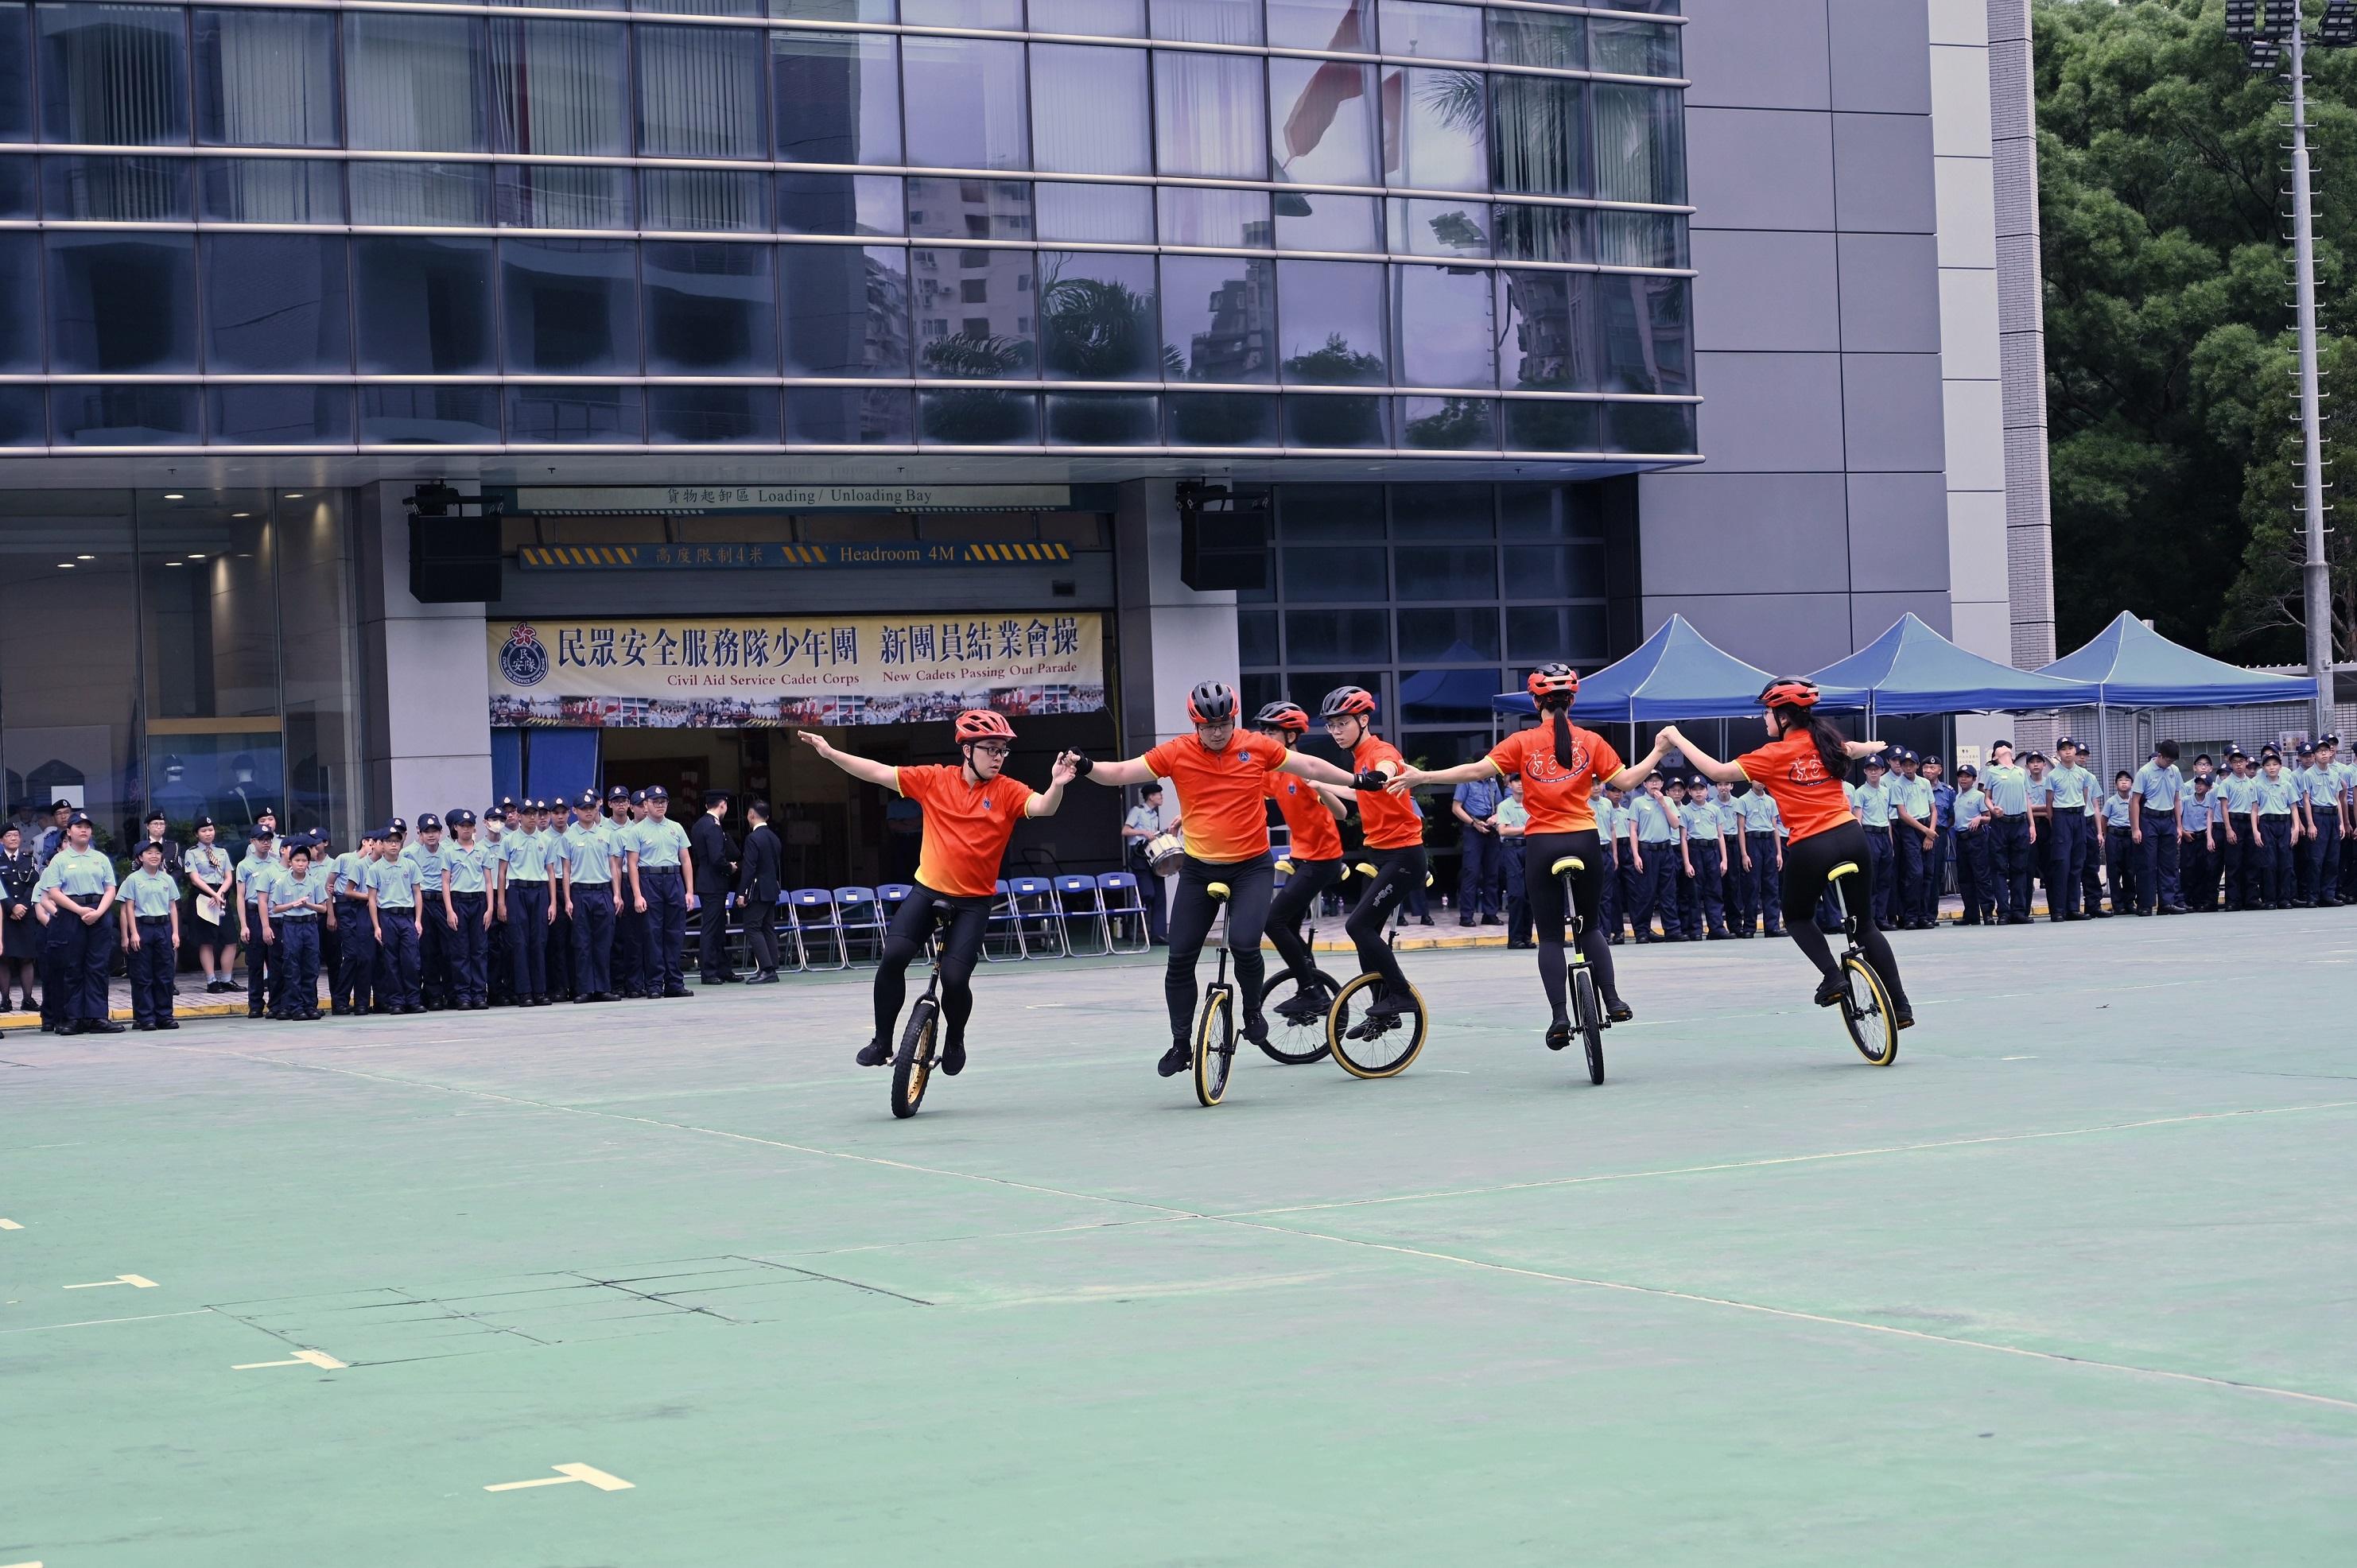 The Civil Aid Service Cadet Corps held the 138th New Cadets Passing-out Parade today (August 26). Photo shows the Cadet Corps Bicycle Demonstration Team performing after the parade.
